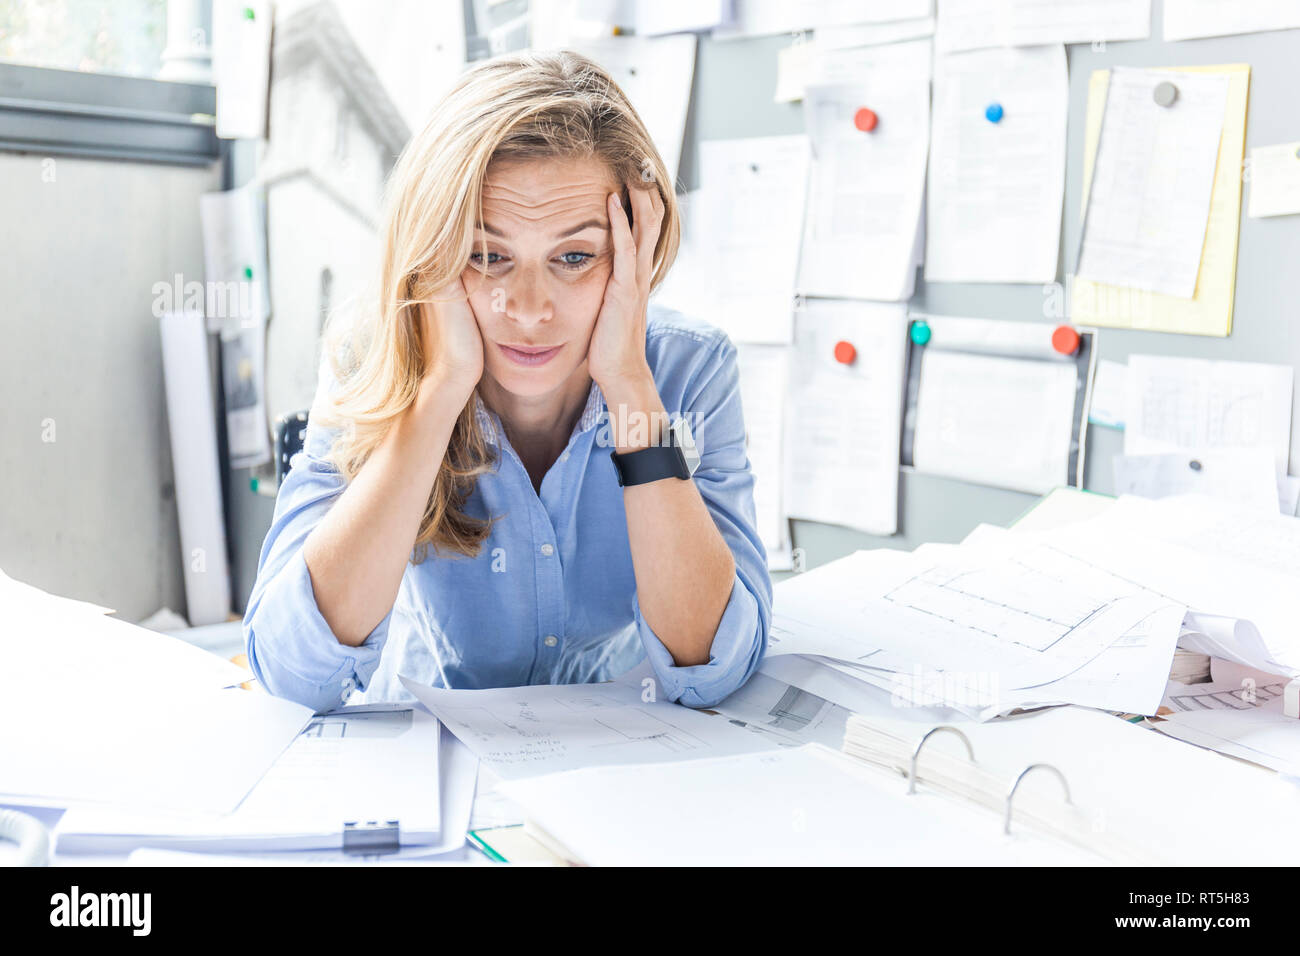 Stressed woman sitting at desk in office surrounded by paperwork Stock Photo